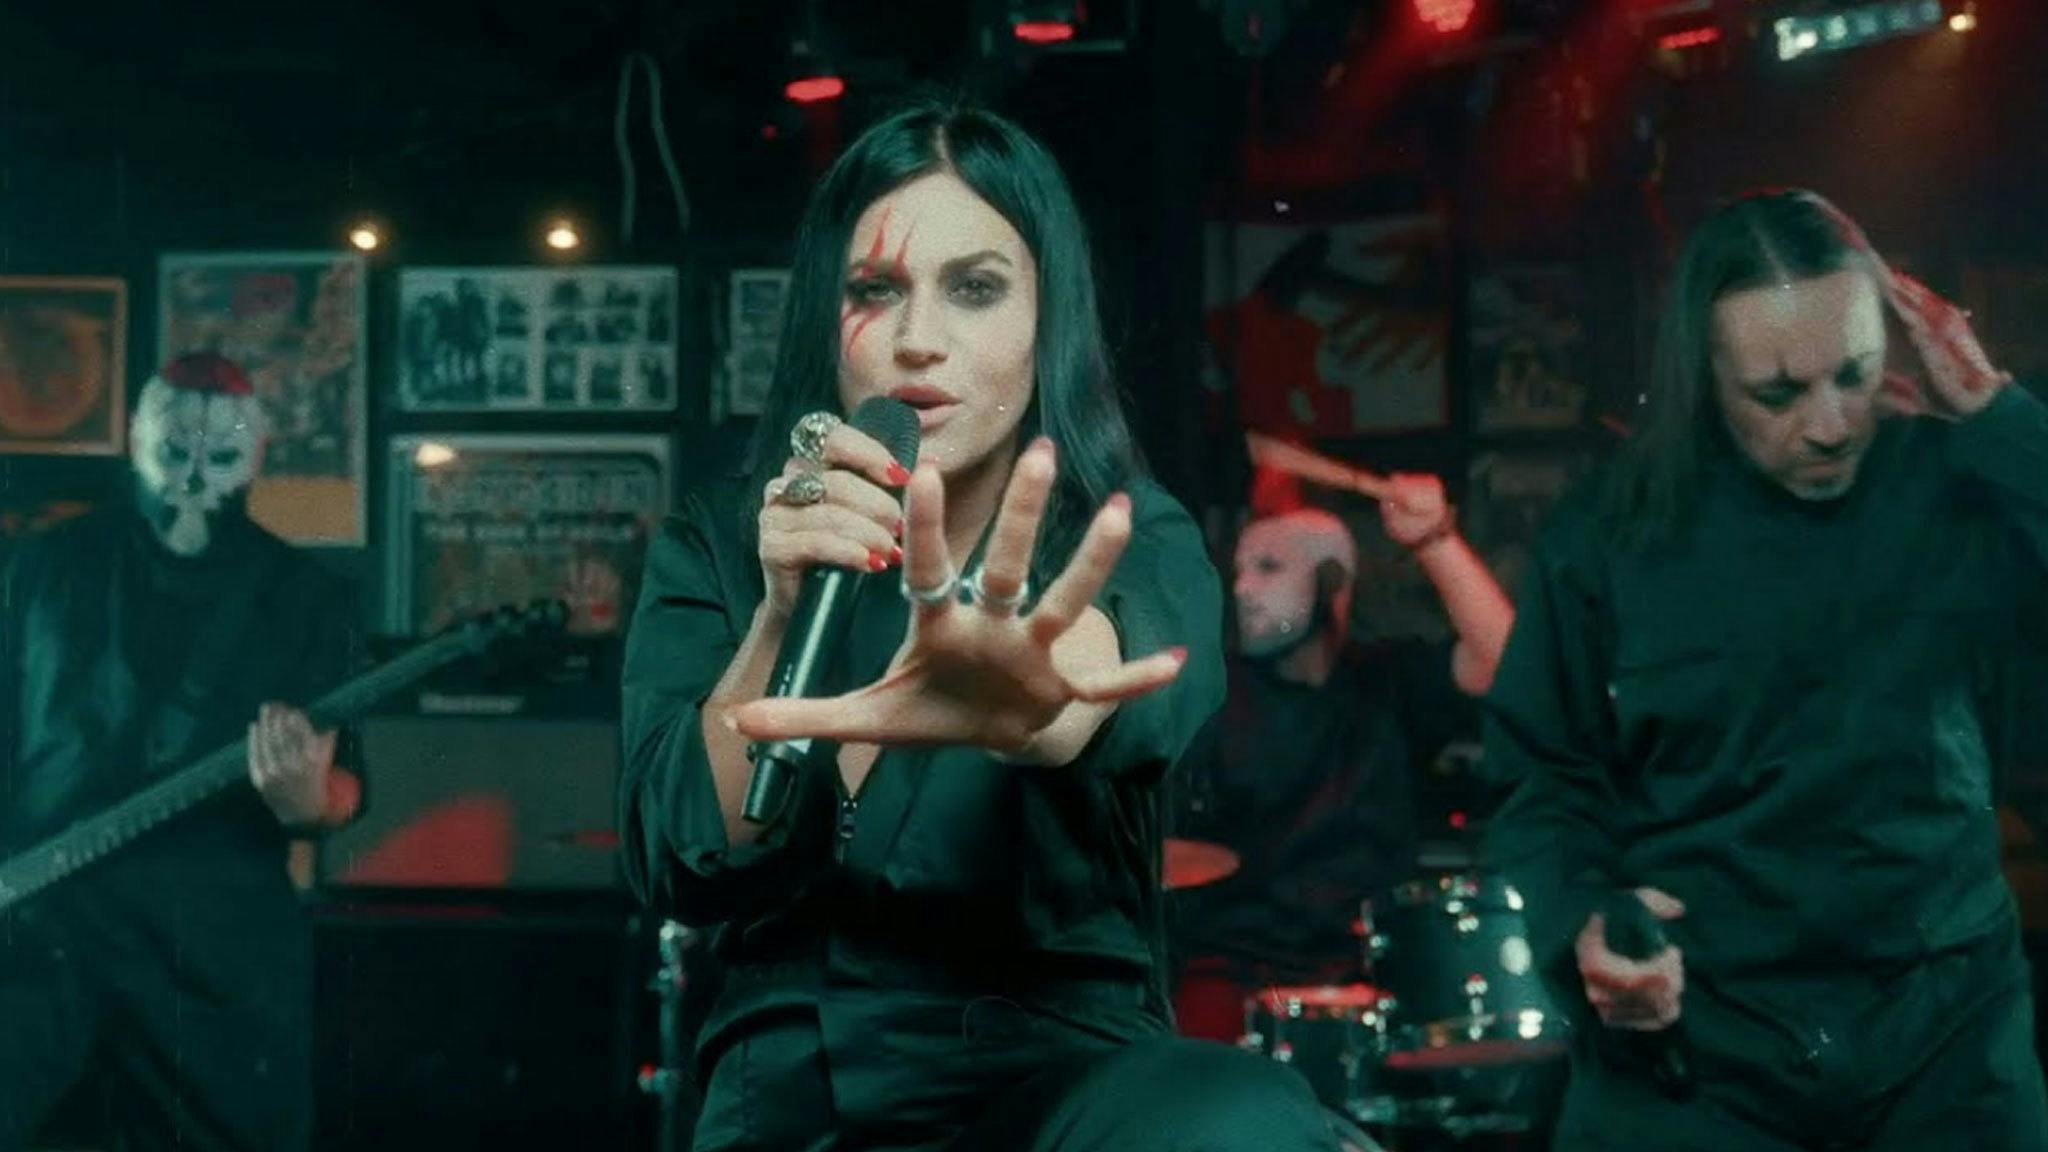 Lacuna Coil release new single, In The Mean Time, featuring Ash Costello